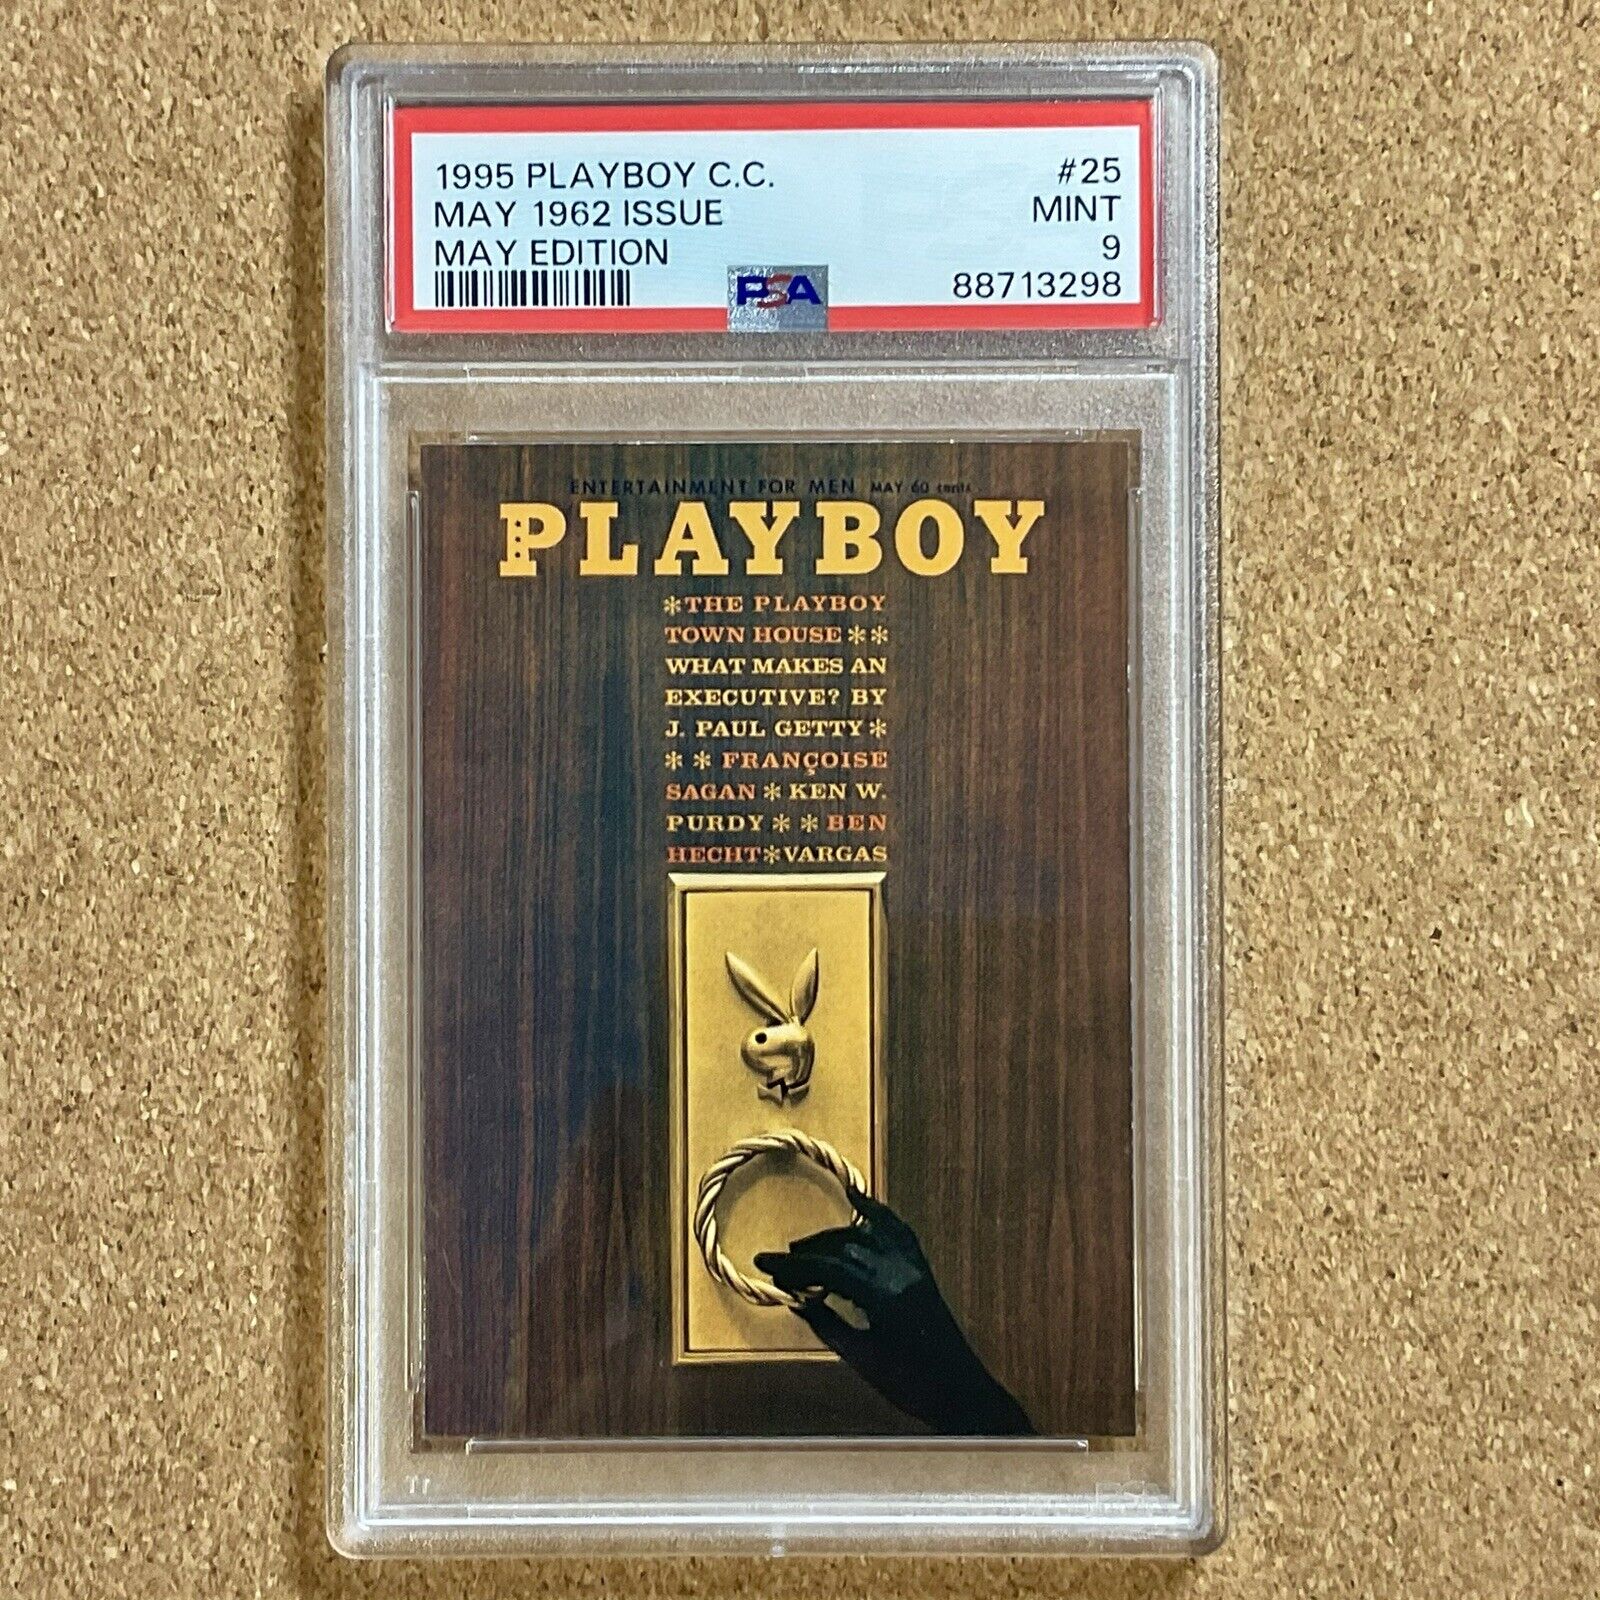 🔥 1995 PLAYBOY COVER COLLECTION MAY EDITION 1962 ISSUE #25 - PSA 9 MINT